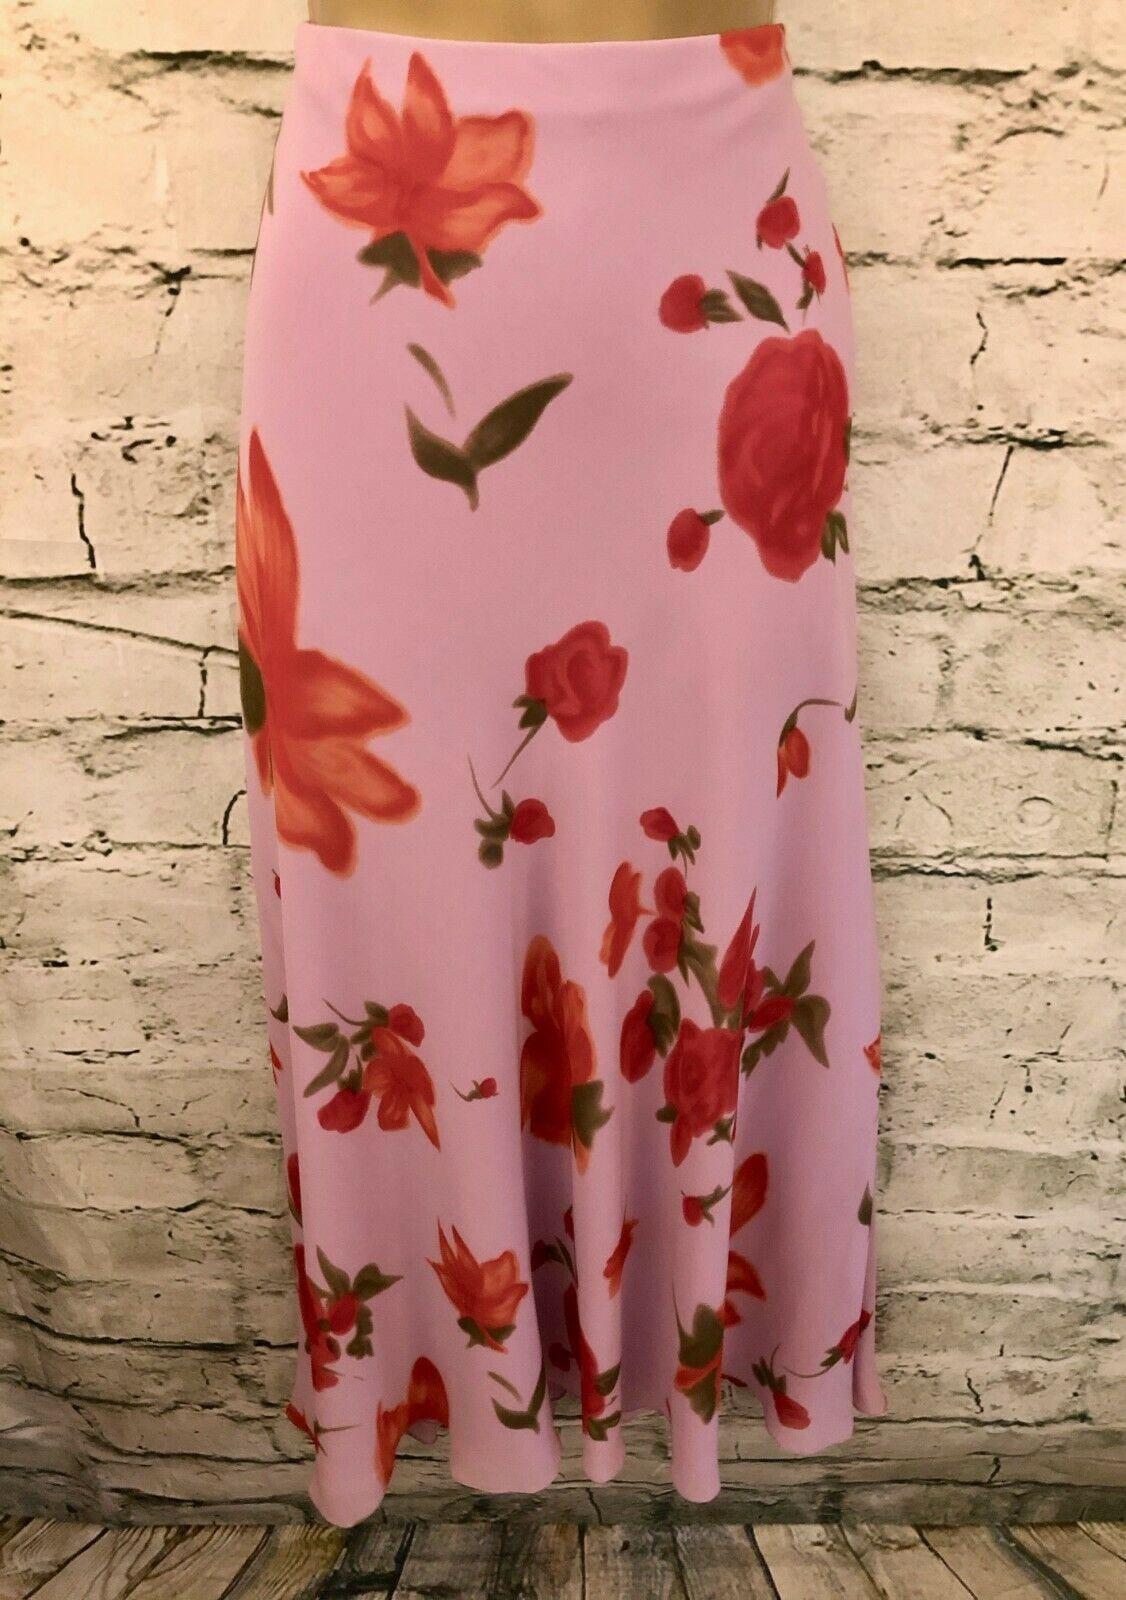 Chrystiano Long Pink Chiffon Floral Special Occasion Outfit UK 12 US 8 EU 40 BNWT RRP £295 Timeless Fashions